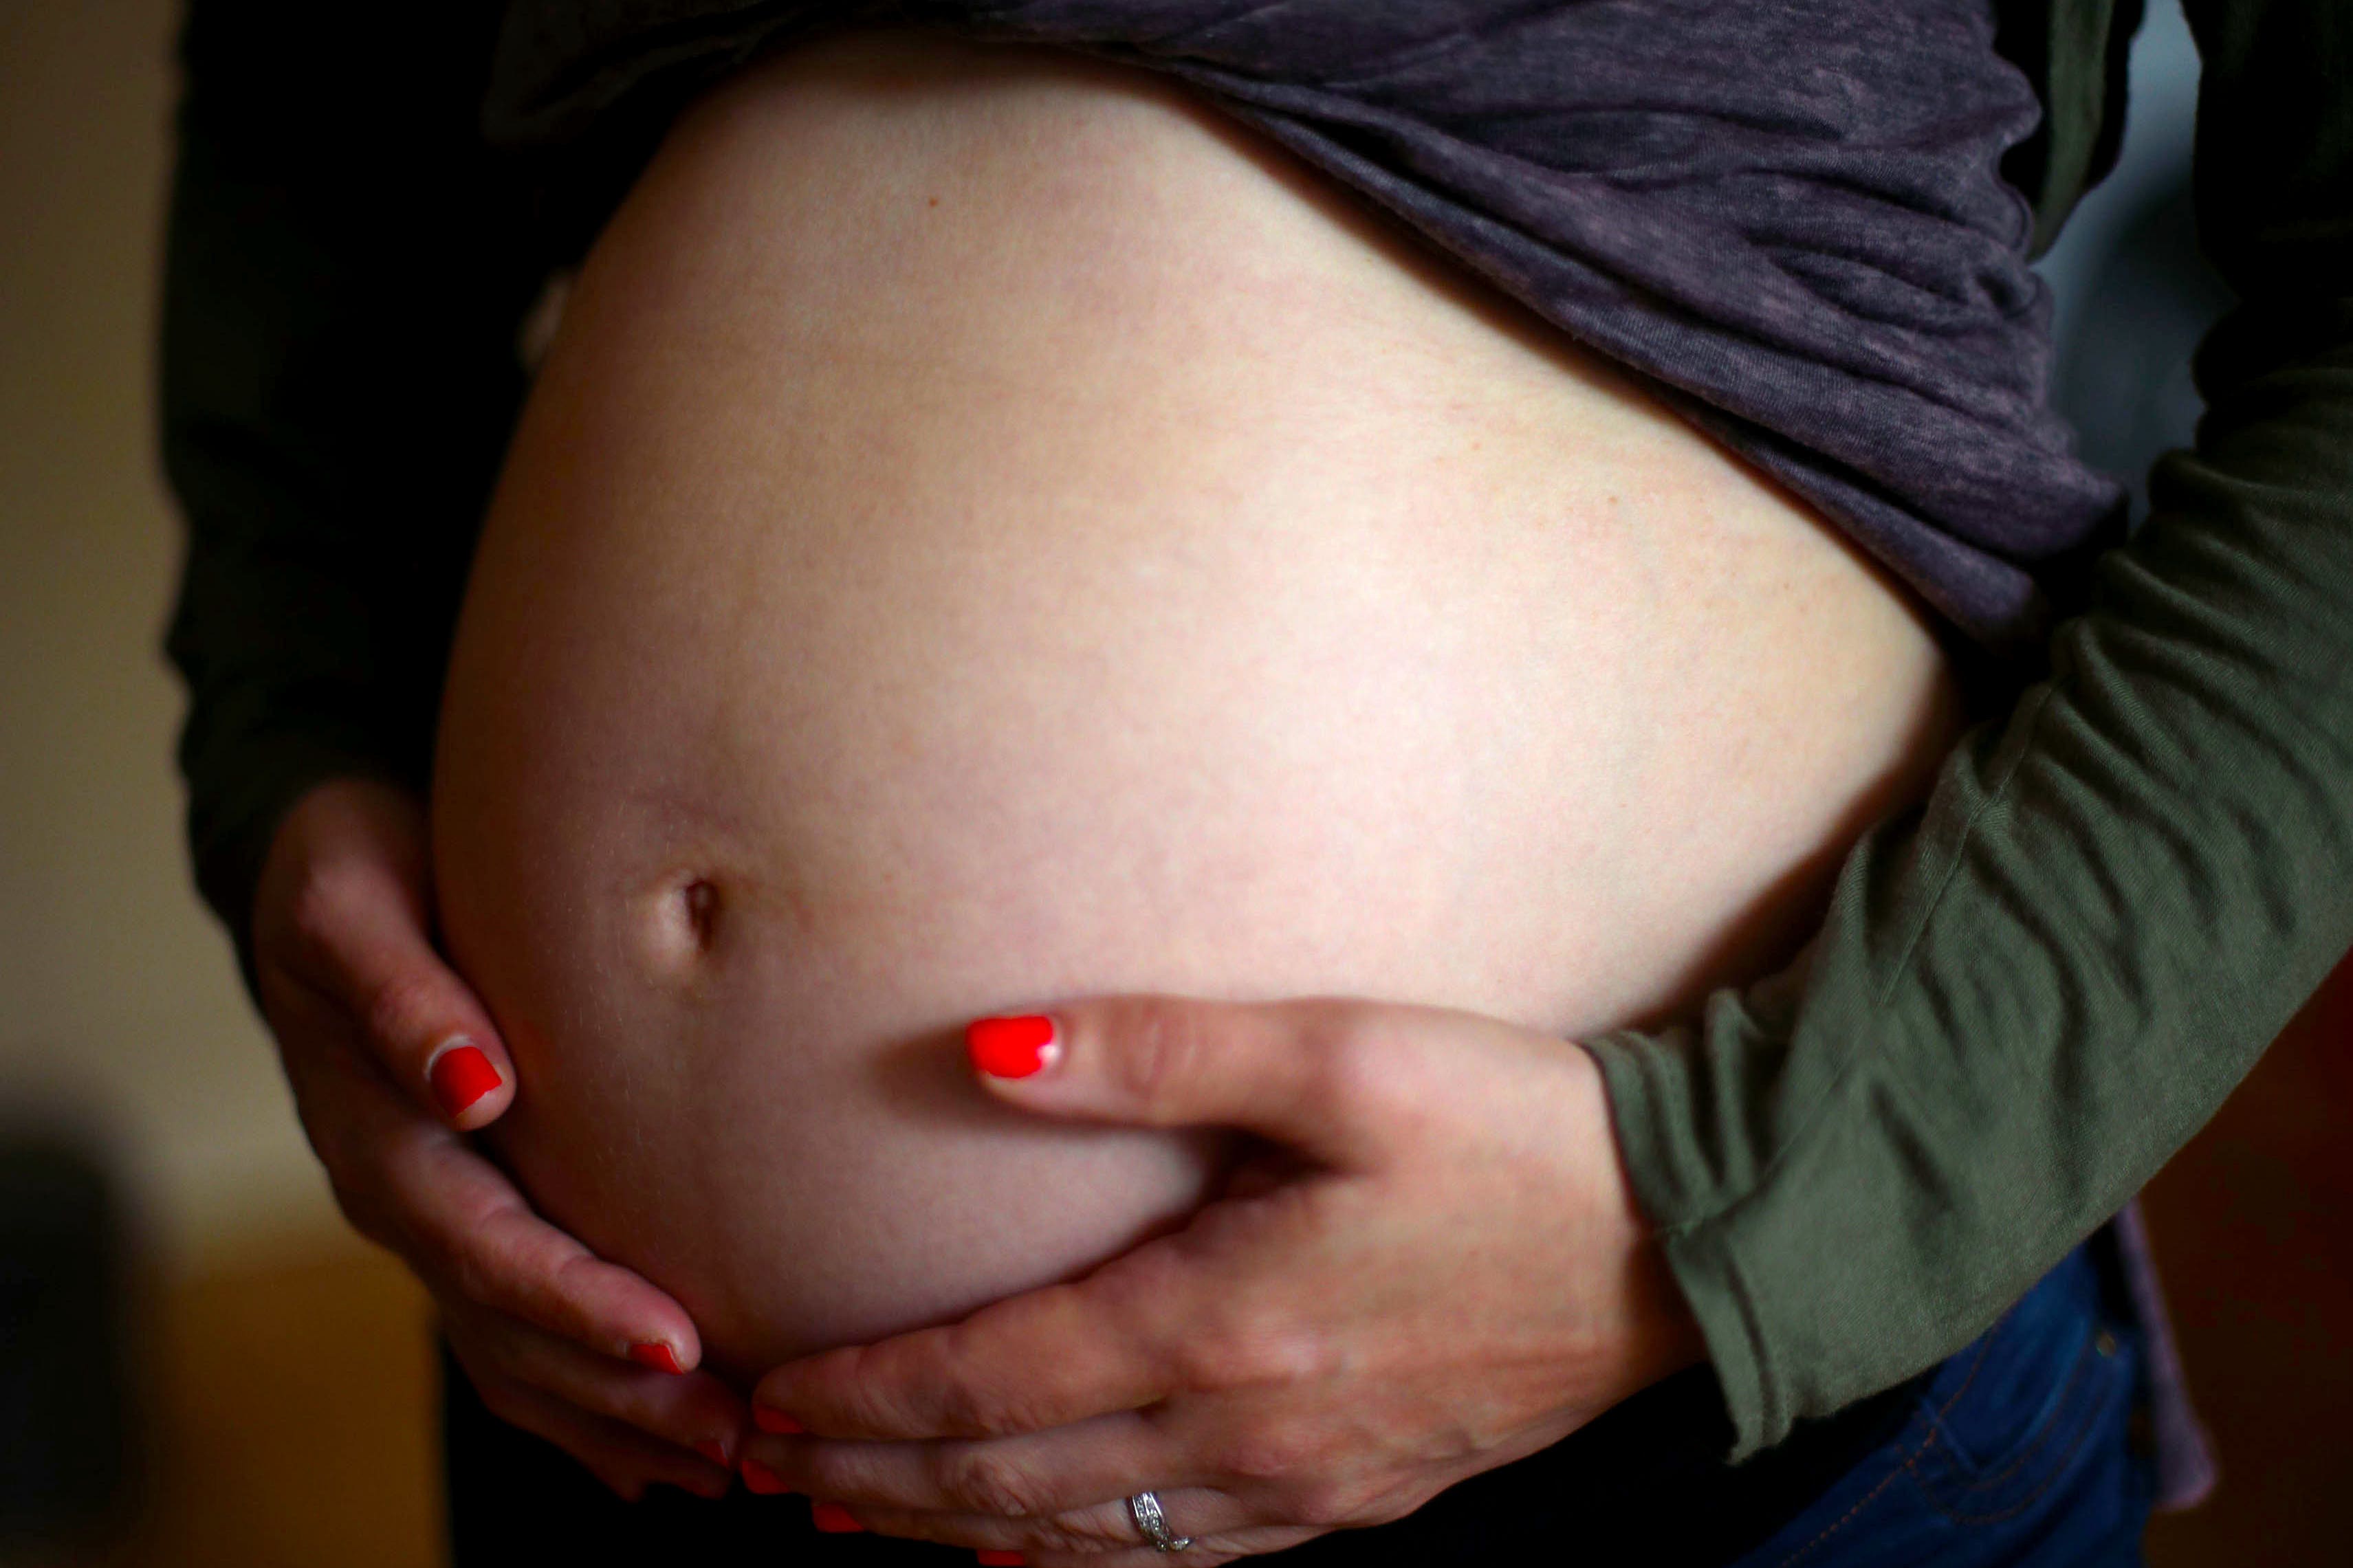 Pregnant women with depression twice as likely to die as those without